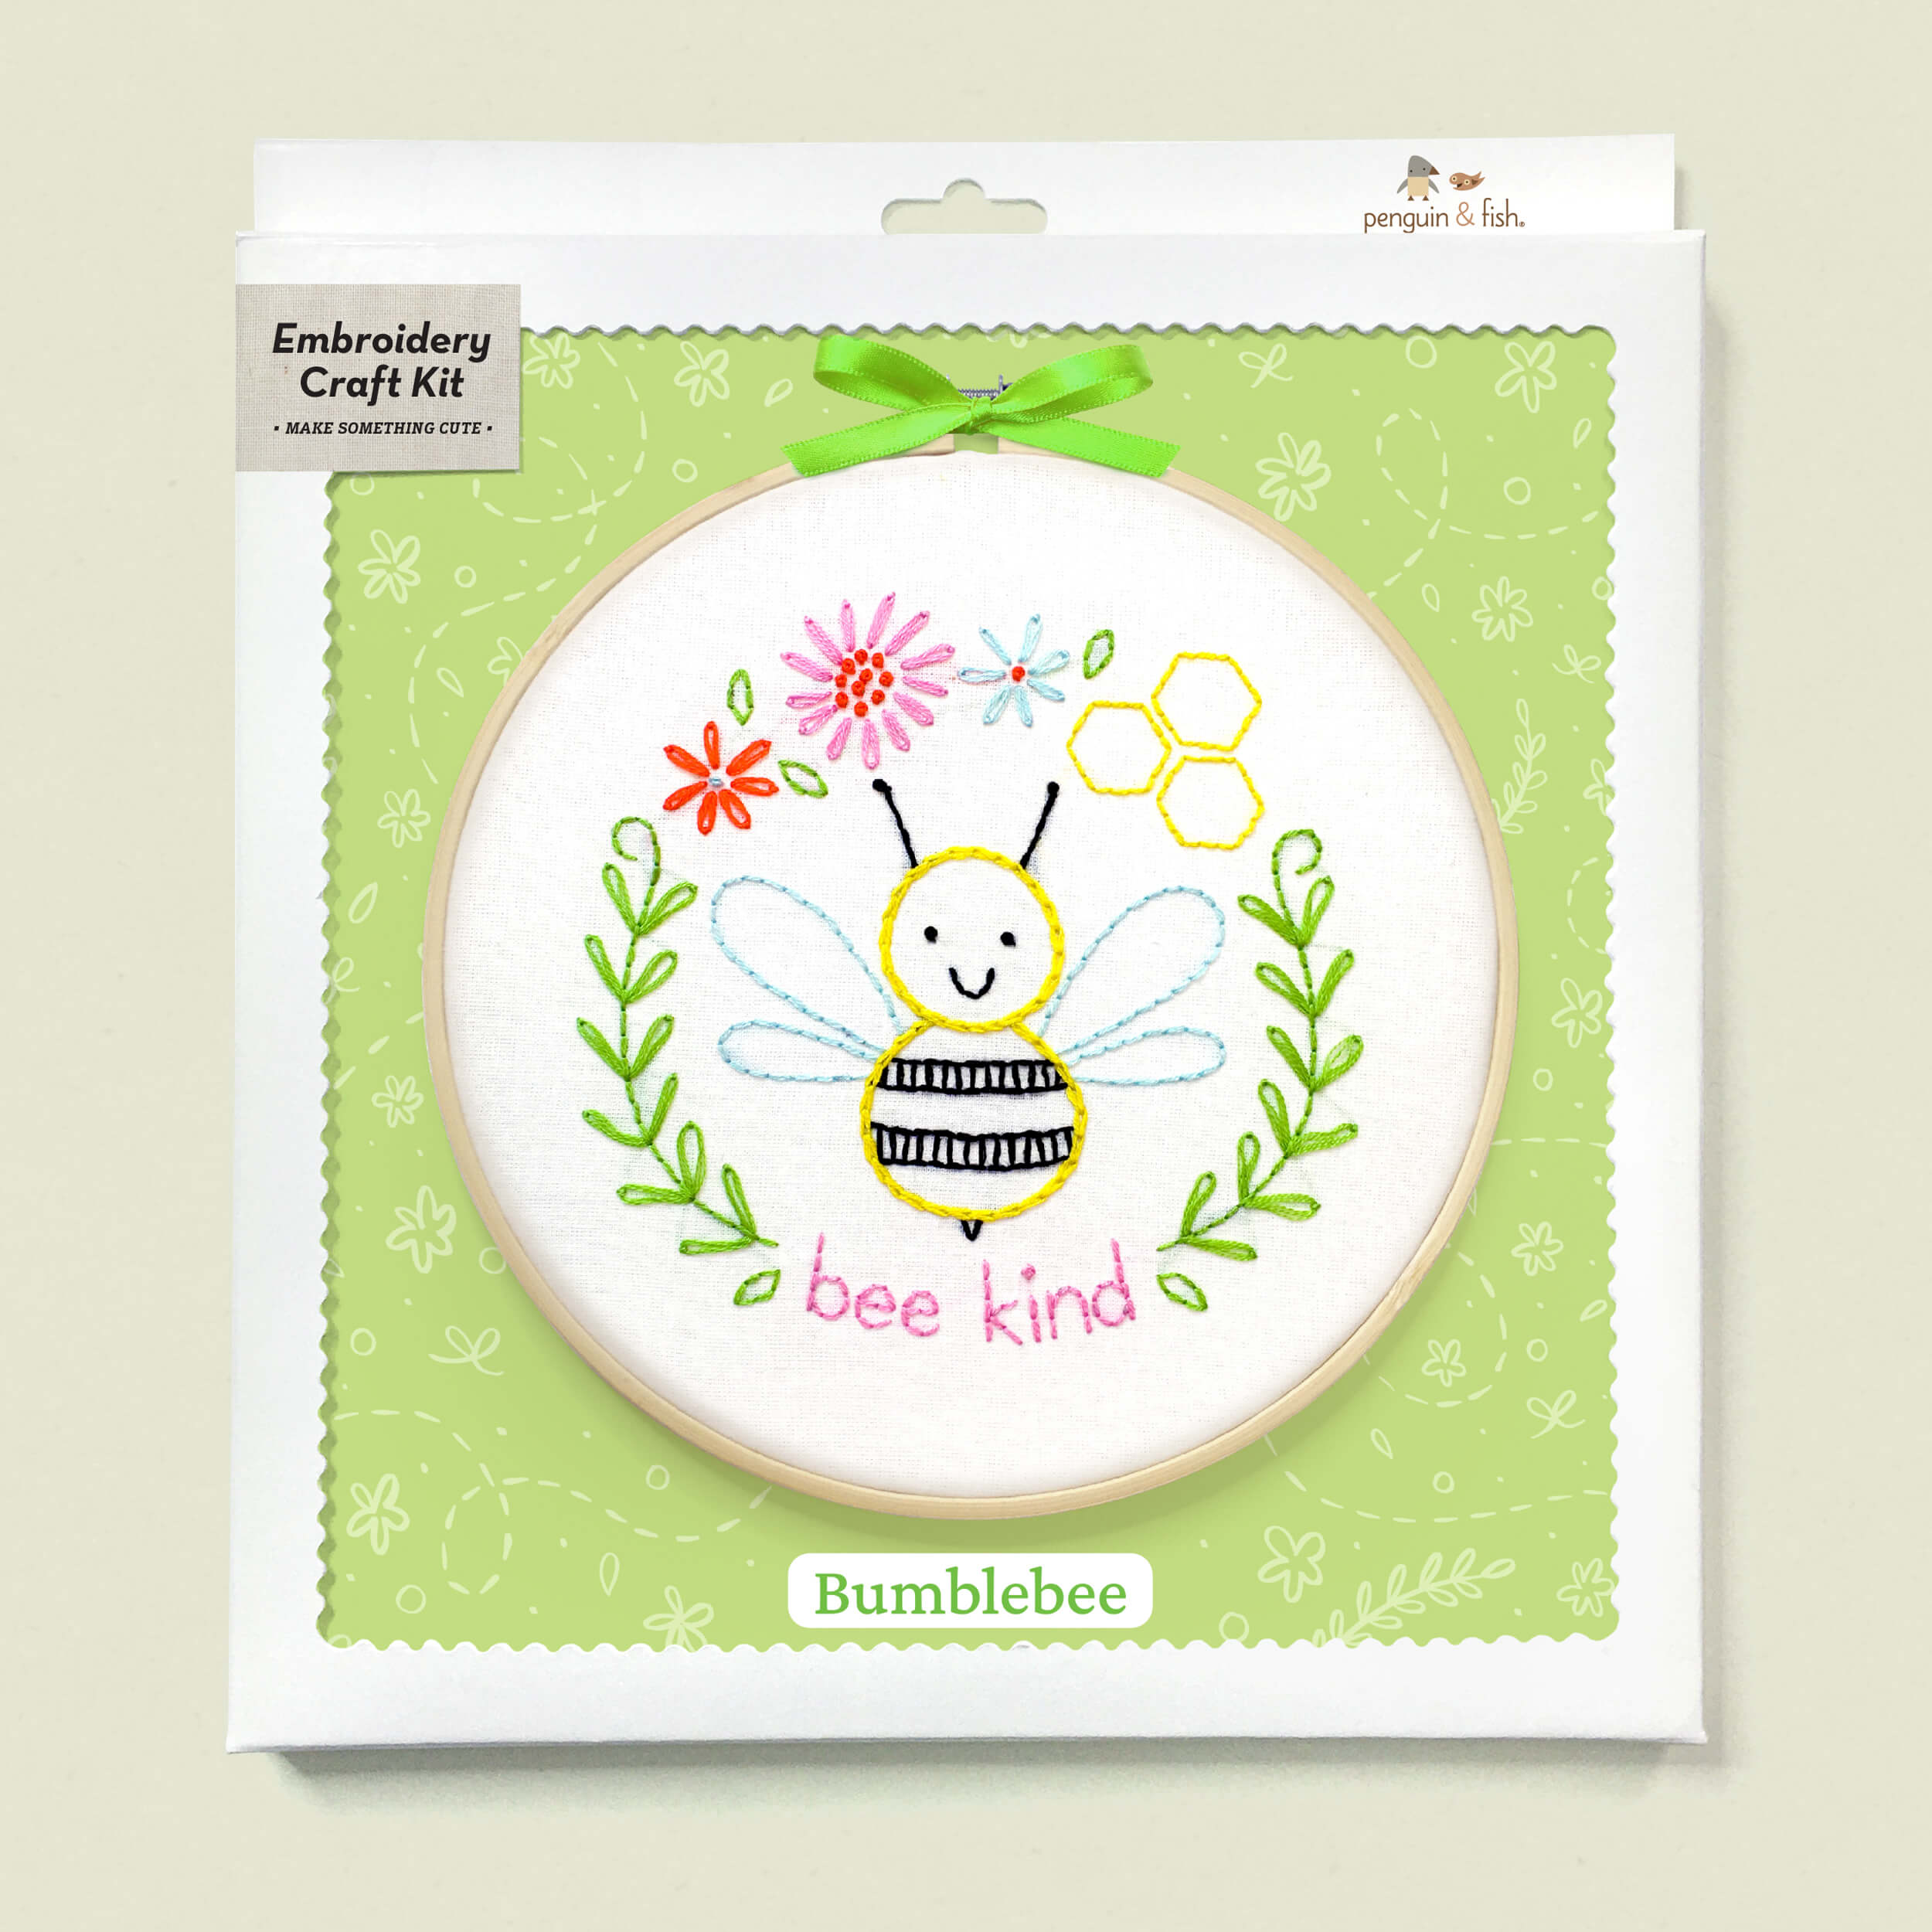 Bumblebee embroidery kit in a box